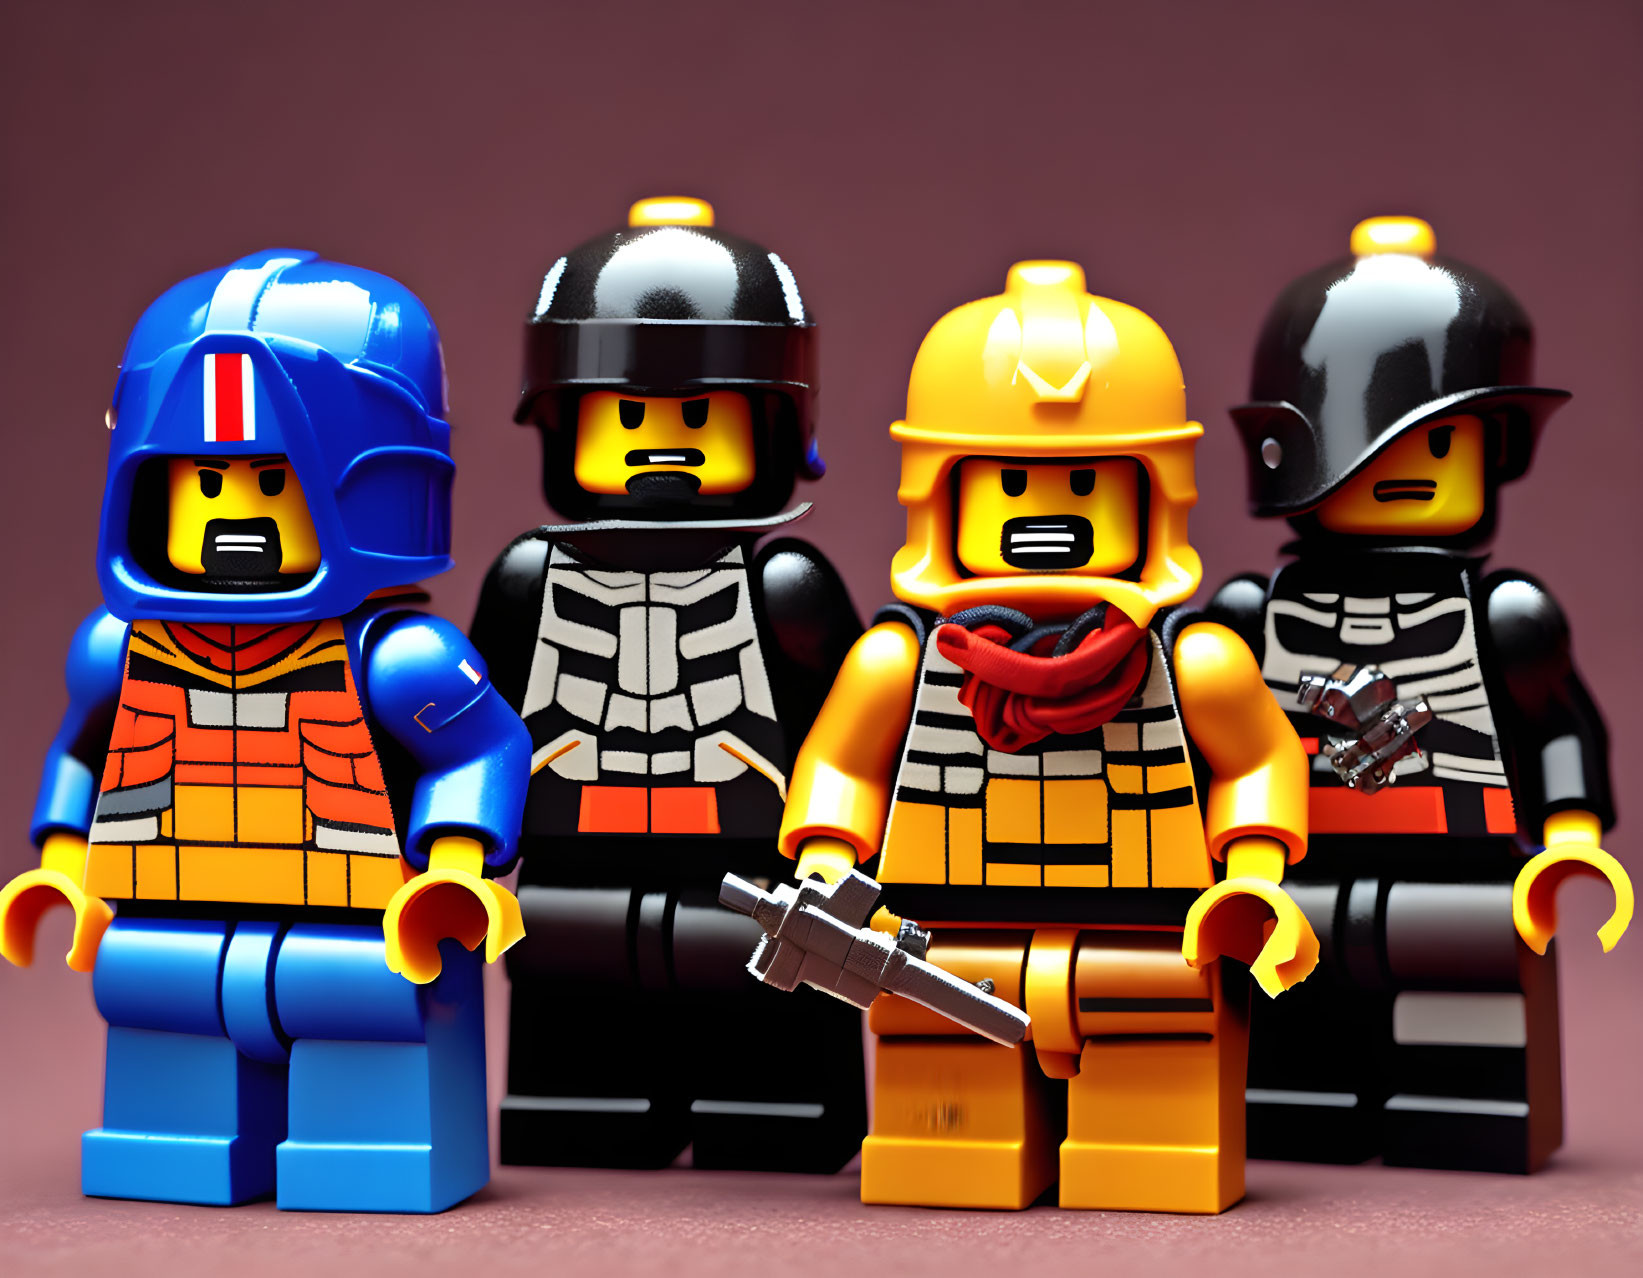 Lego minifigures in firefighter and police officer outfits on pink backdrop